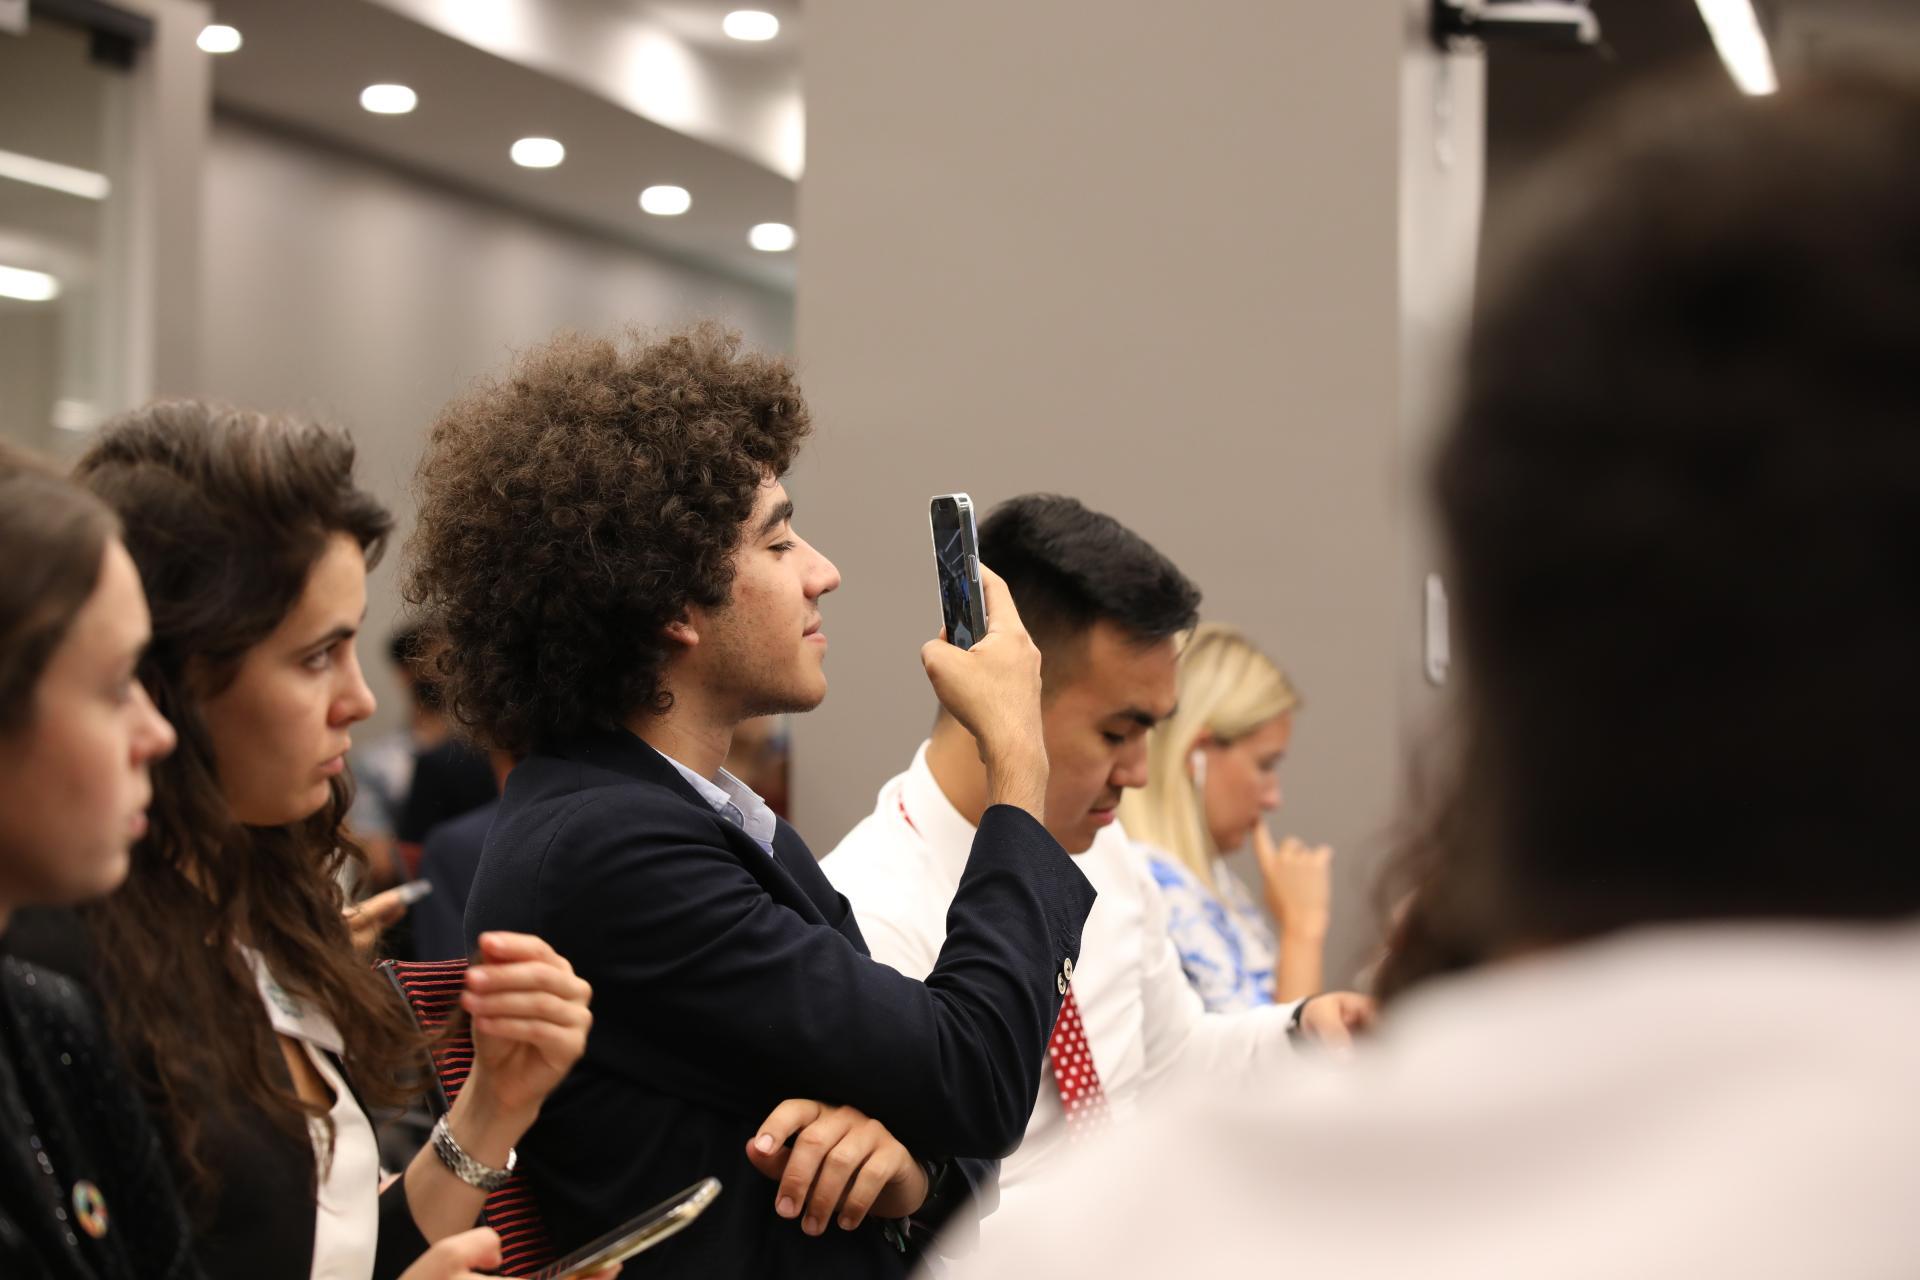 Omar (centre) photographs a meeting at the Youth4Climate: Powering Action event at the United Nations General Assembly.